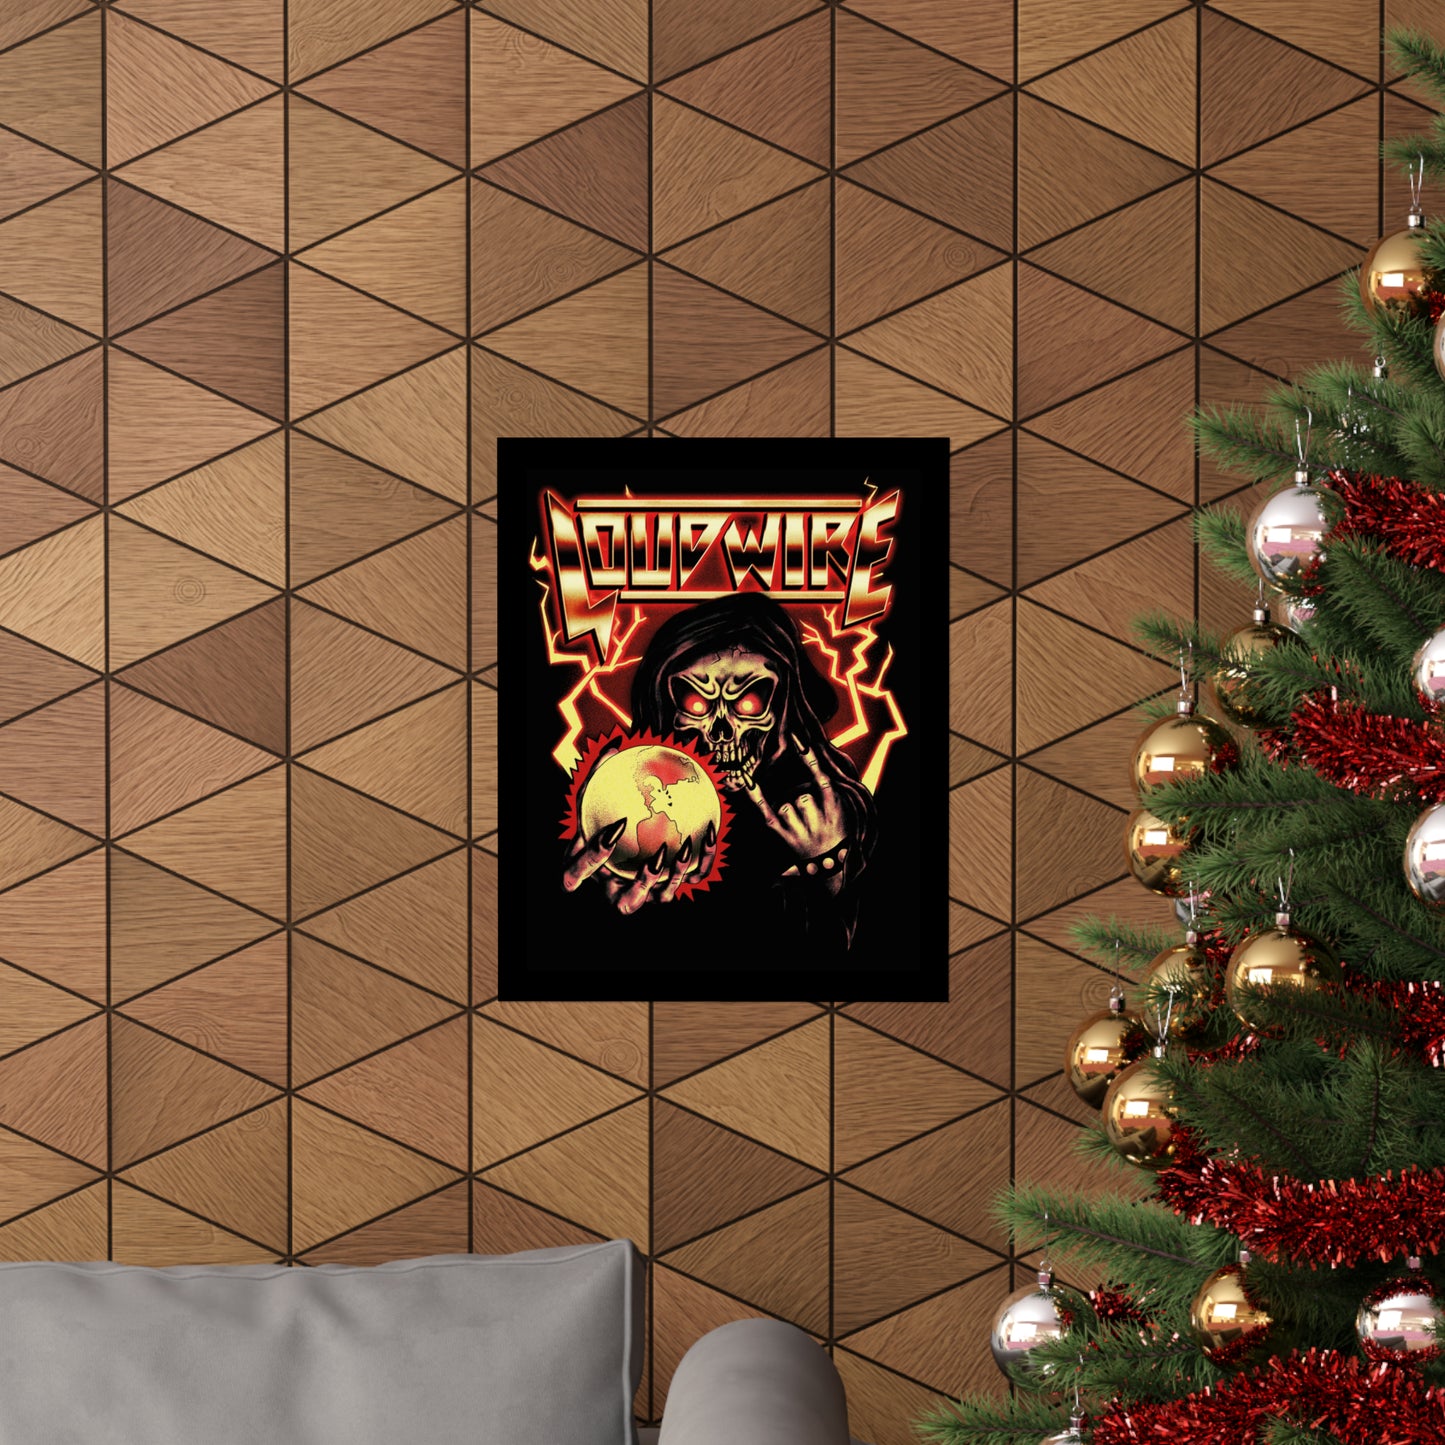 '80s METAL POSTERS (Gold)